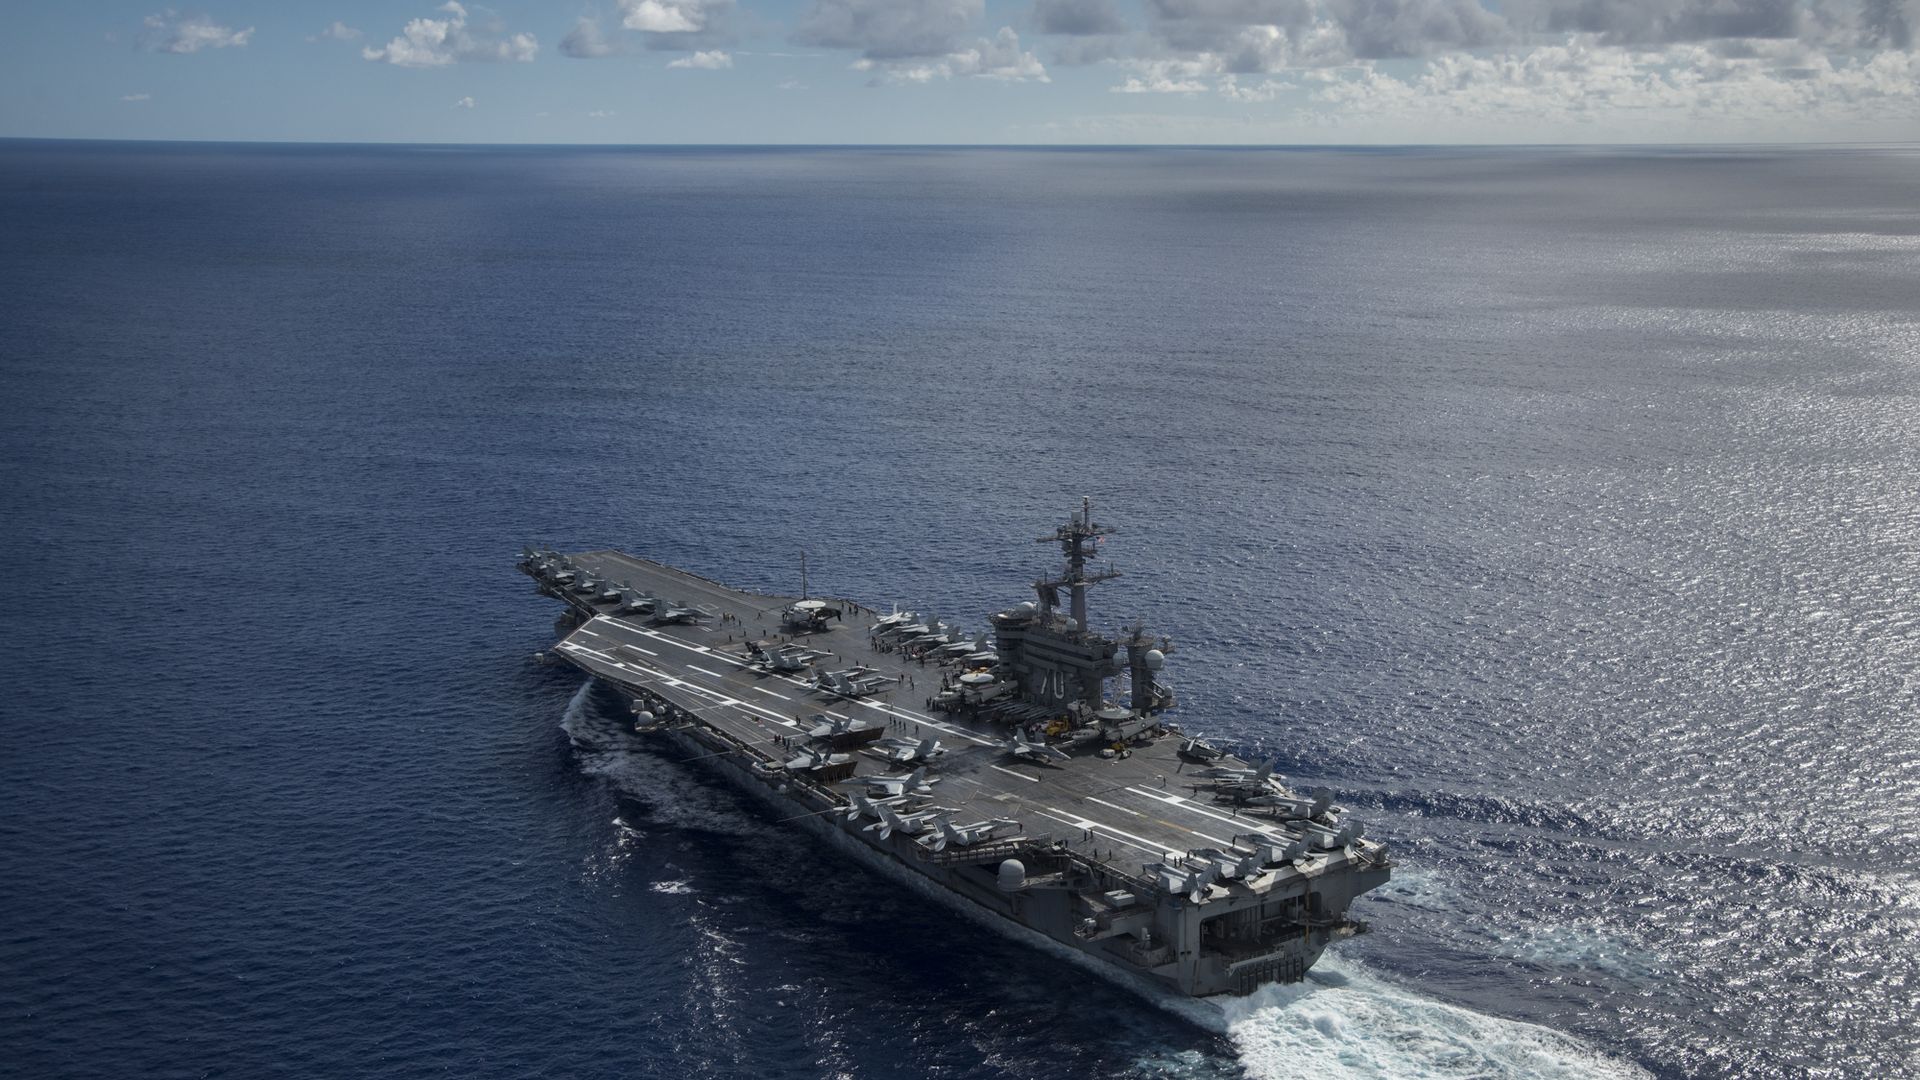  The USS Carl Vinson conducting a bilateral exercise with the Japan Maritime Self-Defense Force on April 23, 2017 in the Philippine Sea. 